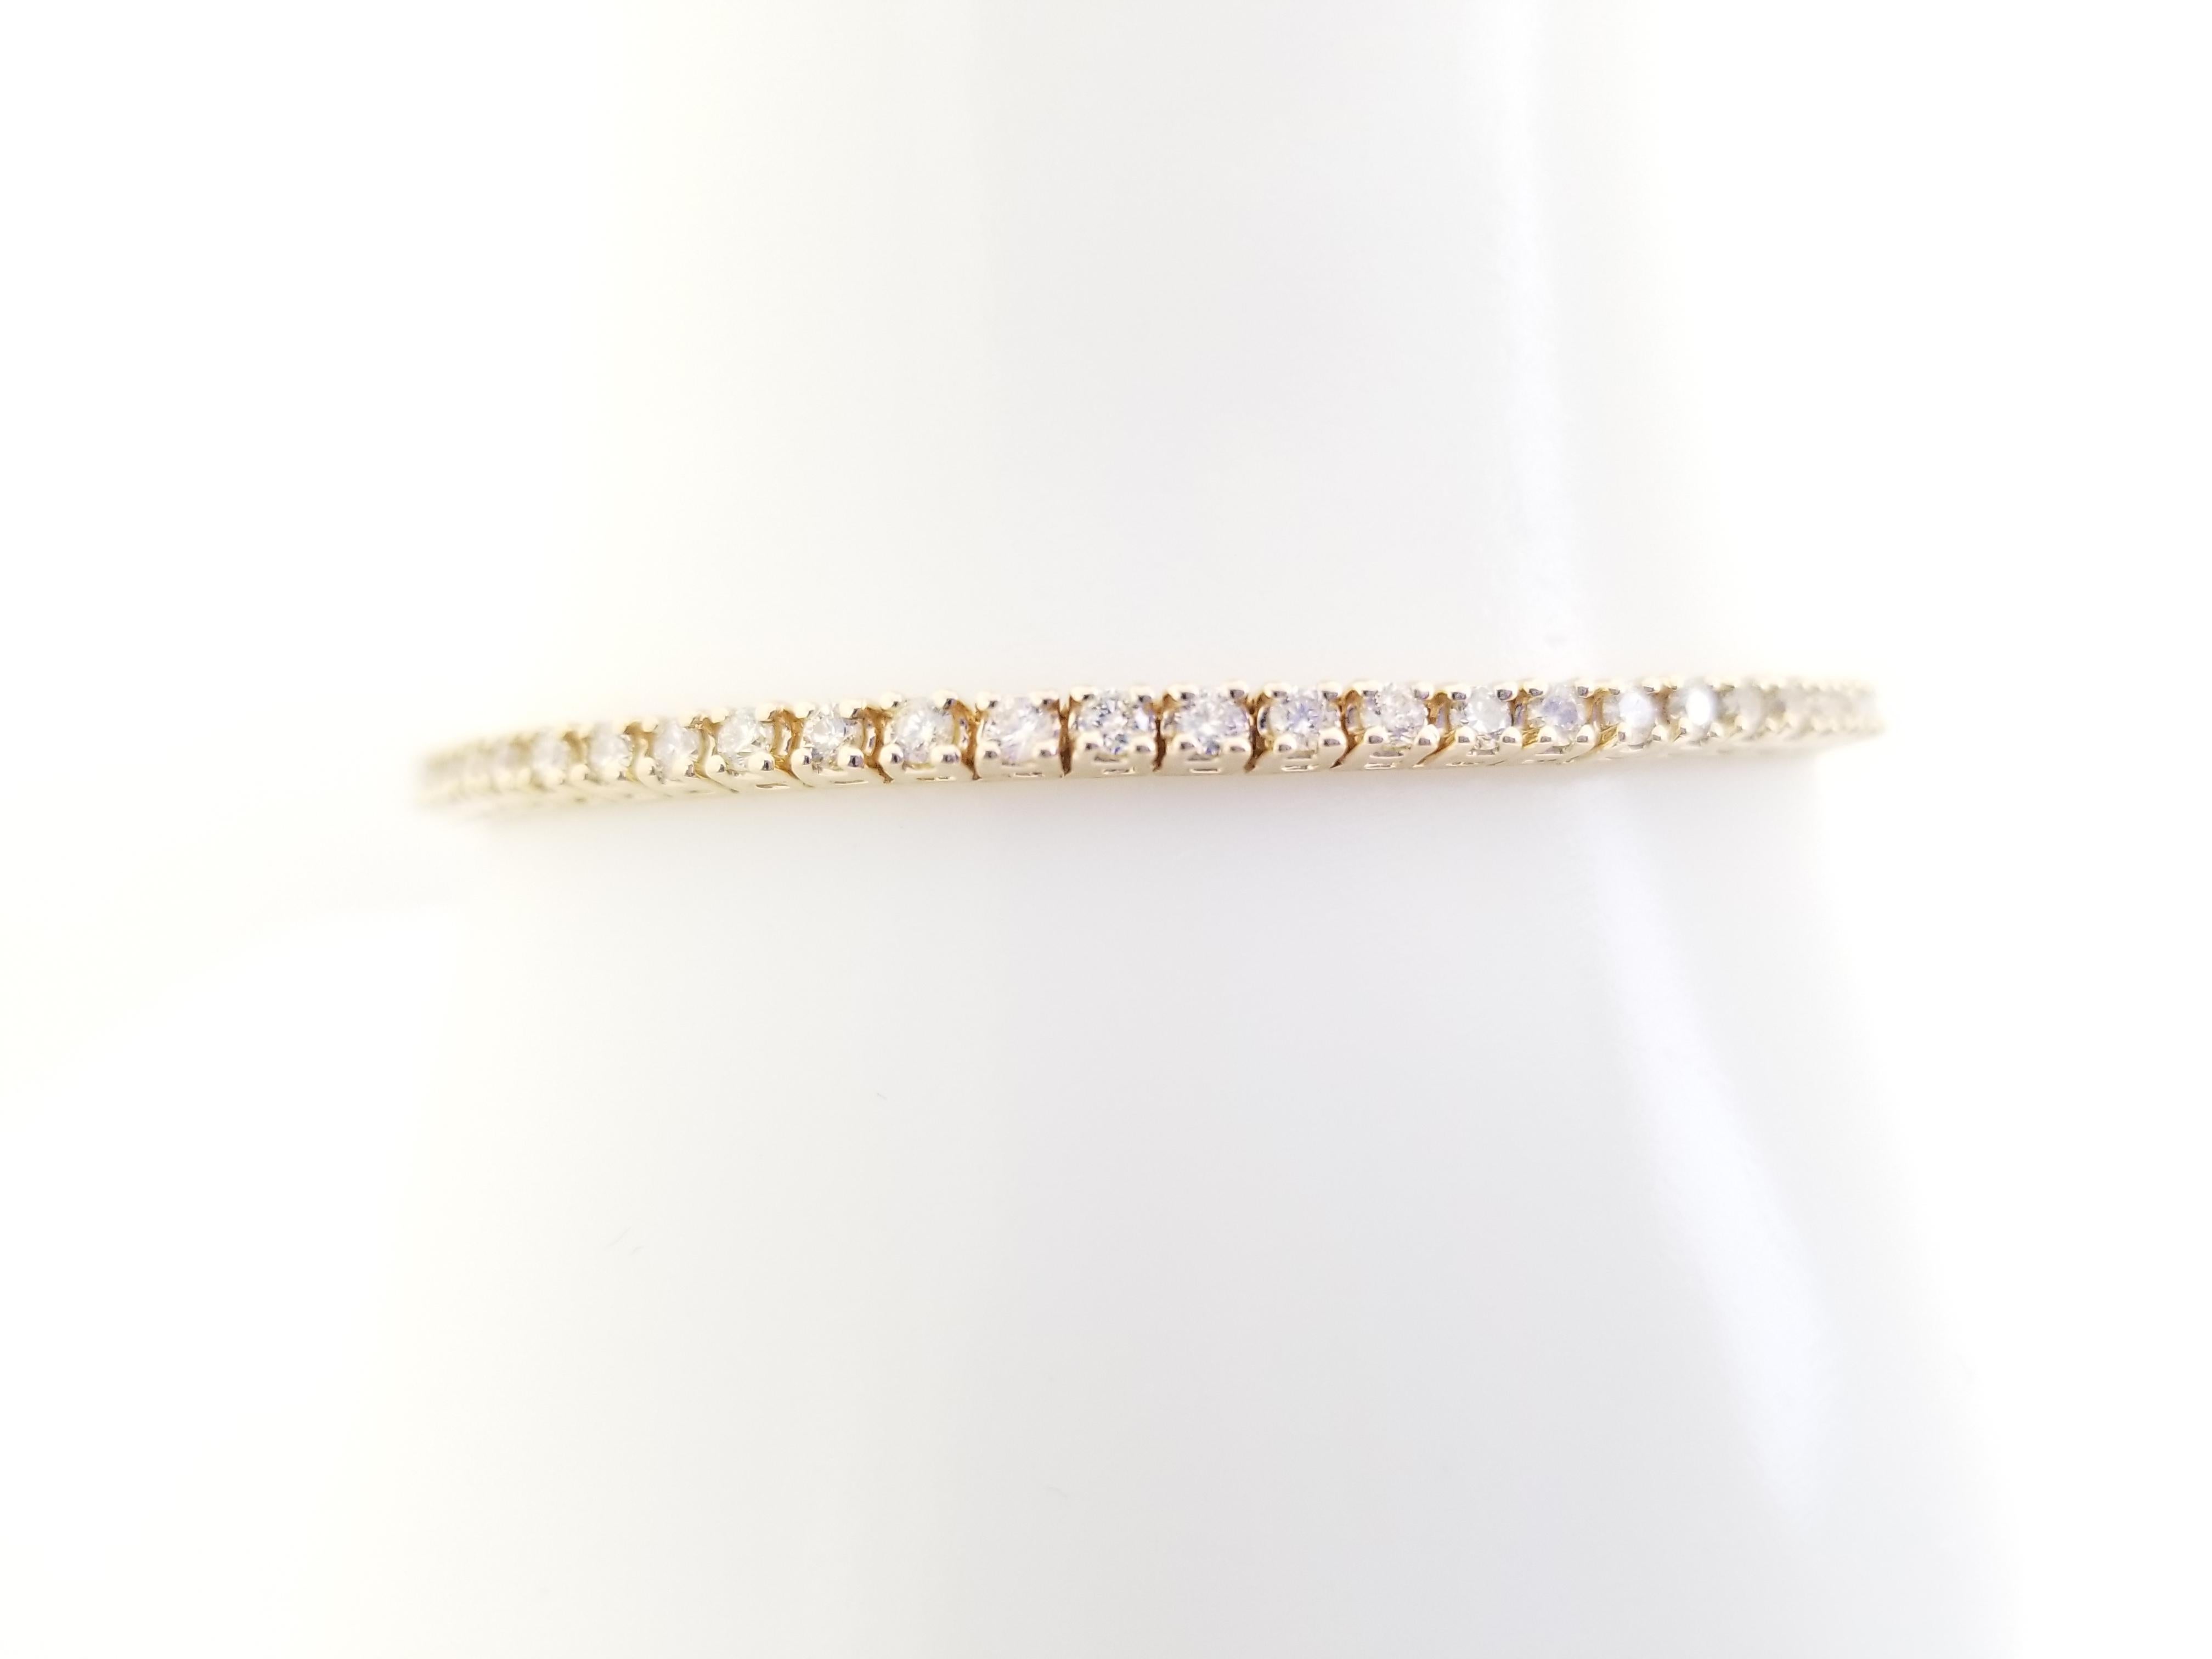 A quality tennis bracelet, round-brilliant cut diamonds. set on 14k yellow gold. each stone is set in a classic four-prong style for maximum light brilliance.

7 inch length.  
Average Color I
Average Clarity SI
2.5 mm wide.